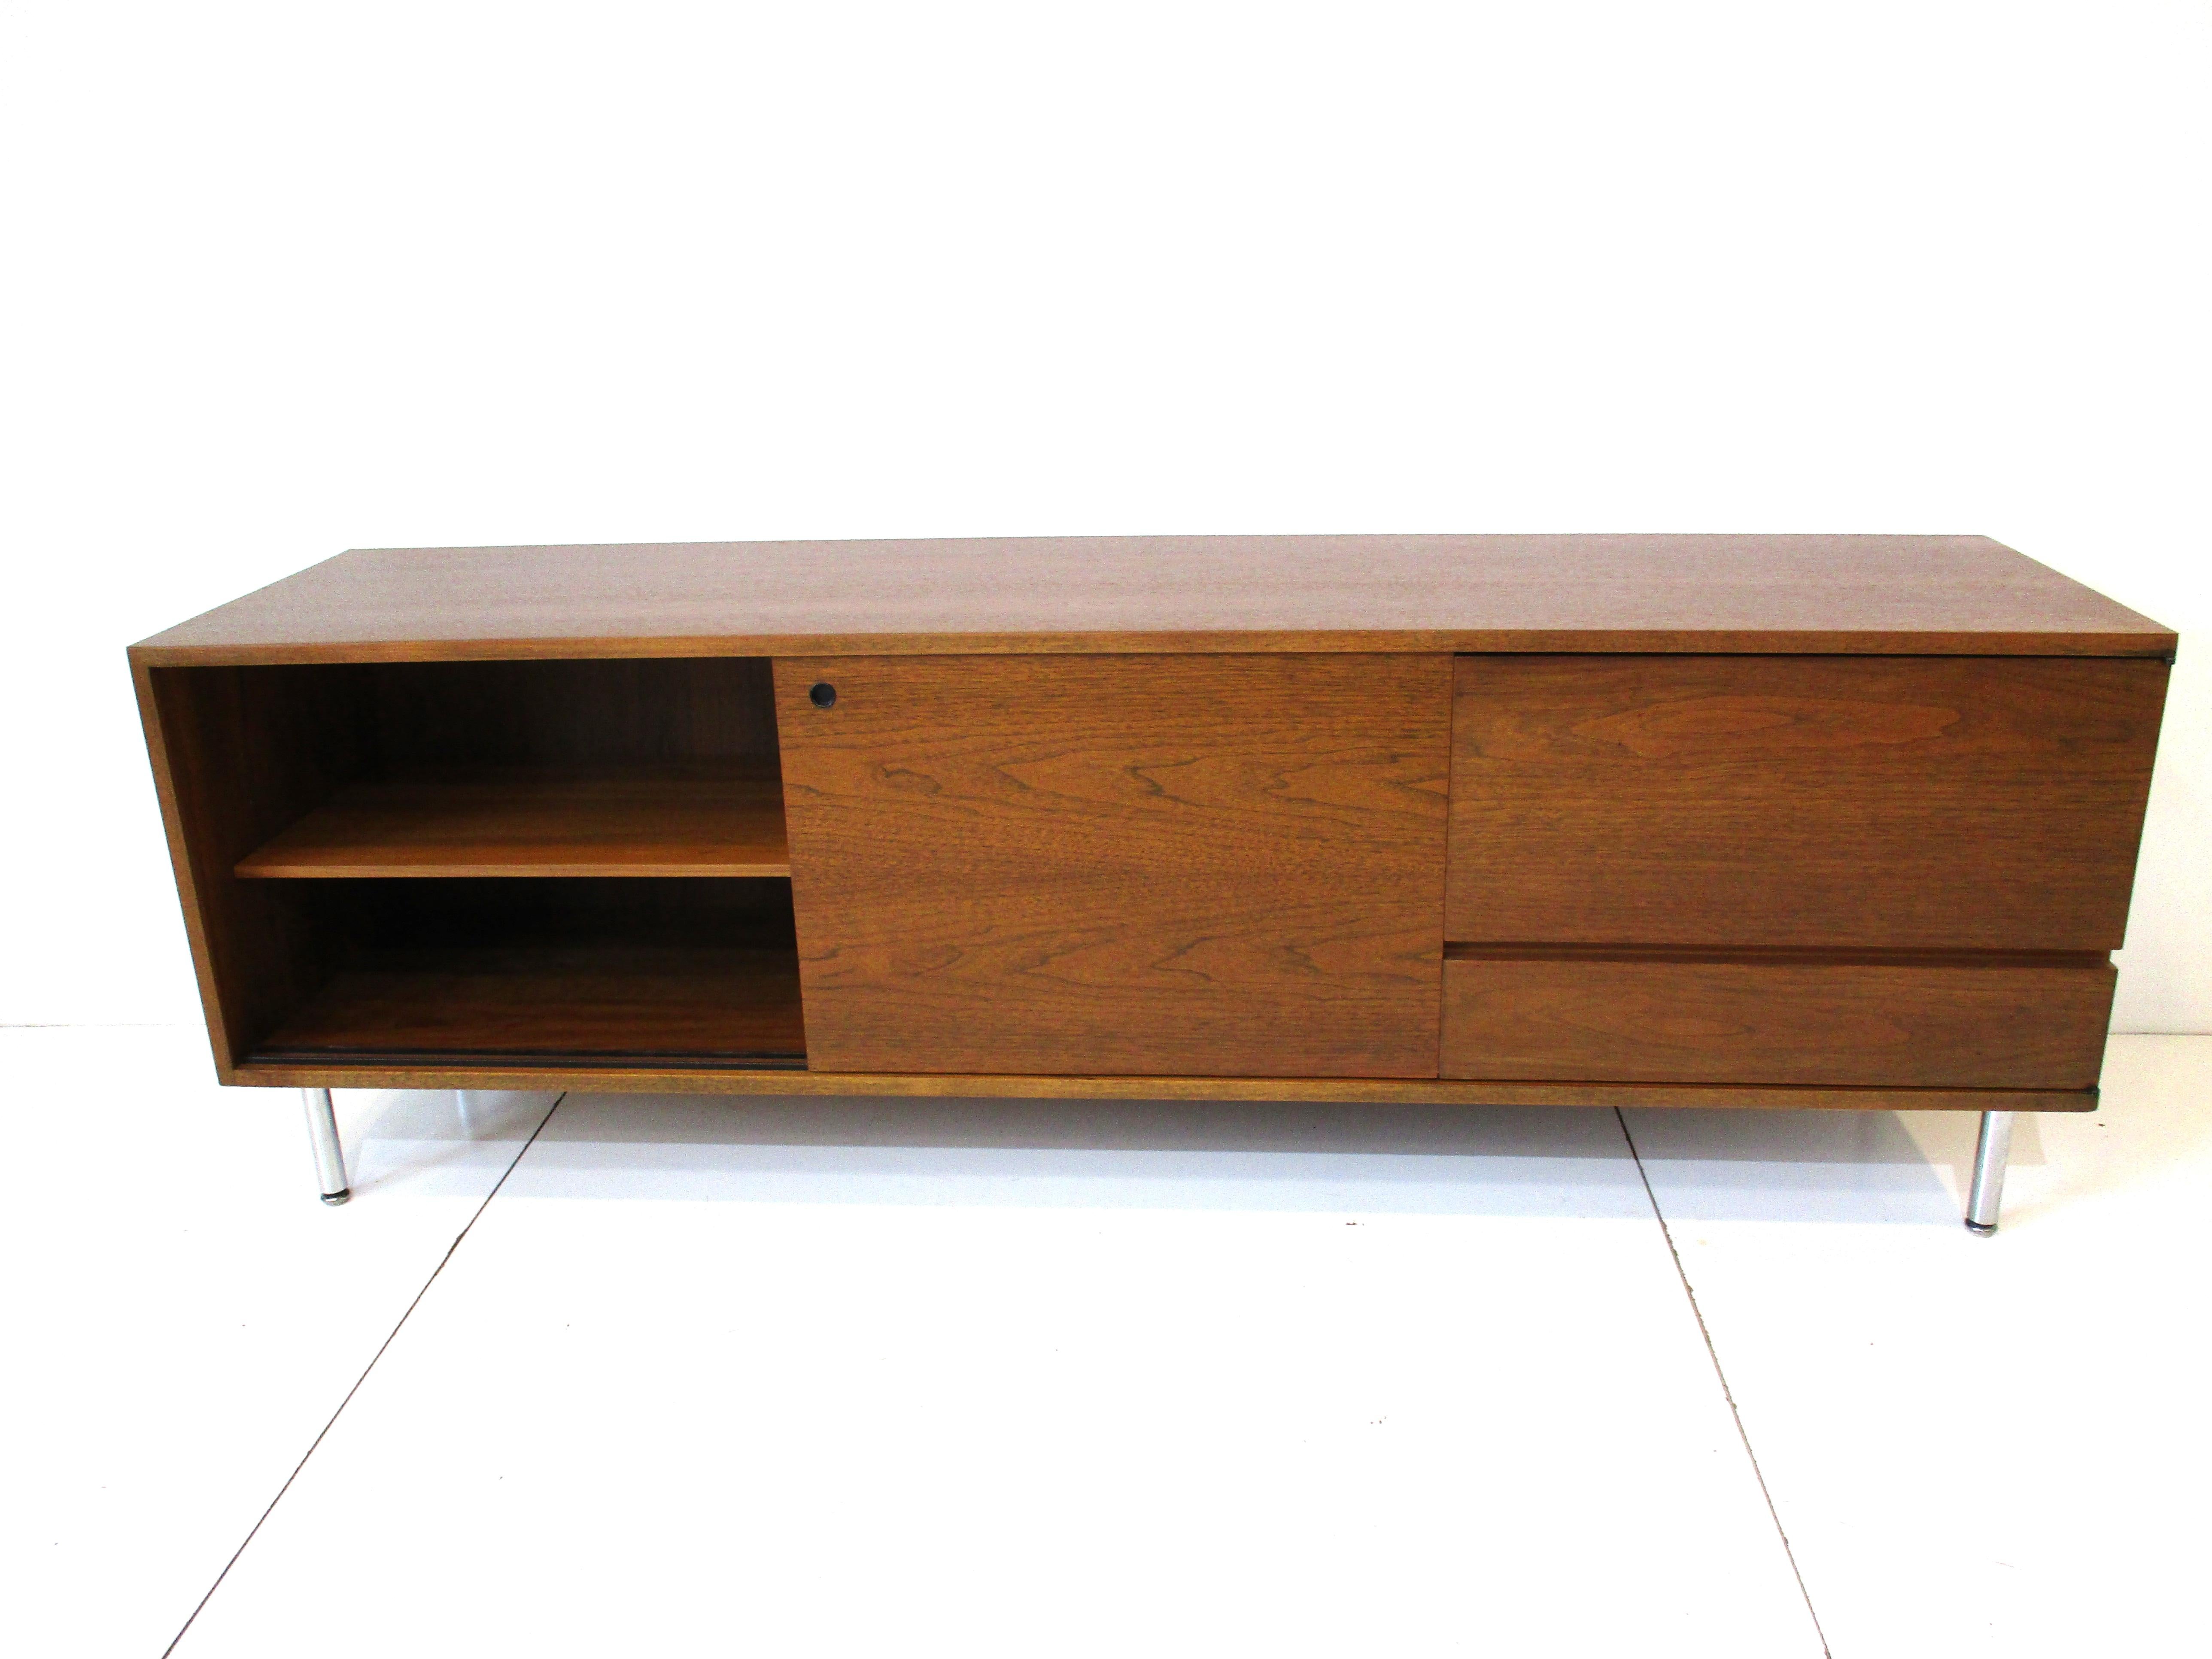 Walnut Credenza Sideboard in the Style of George Nelson / Herman Miller 1